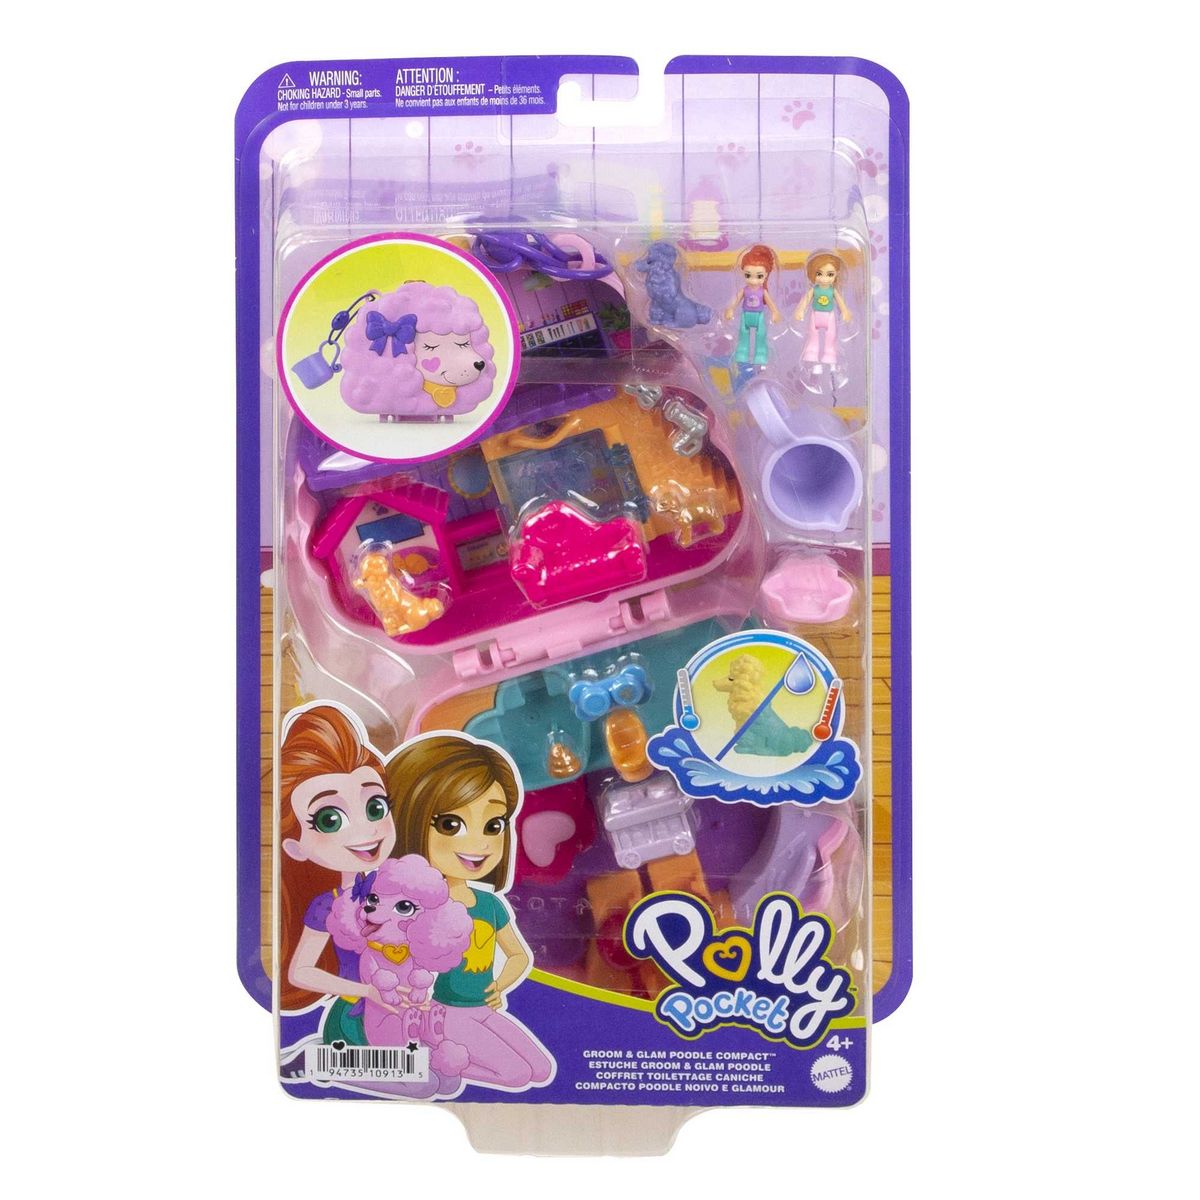 POLLY POCKET Coffret Anniversaire chiot Polly Pocket pas cher